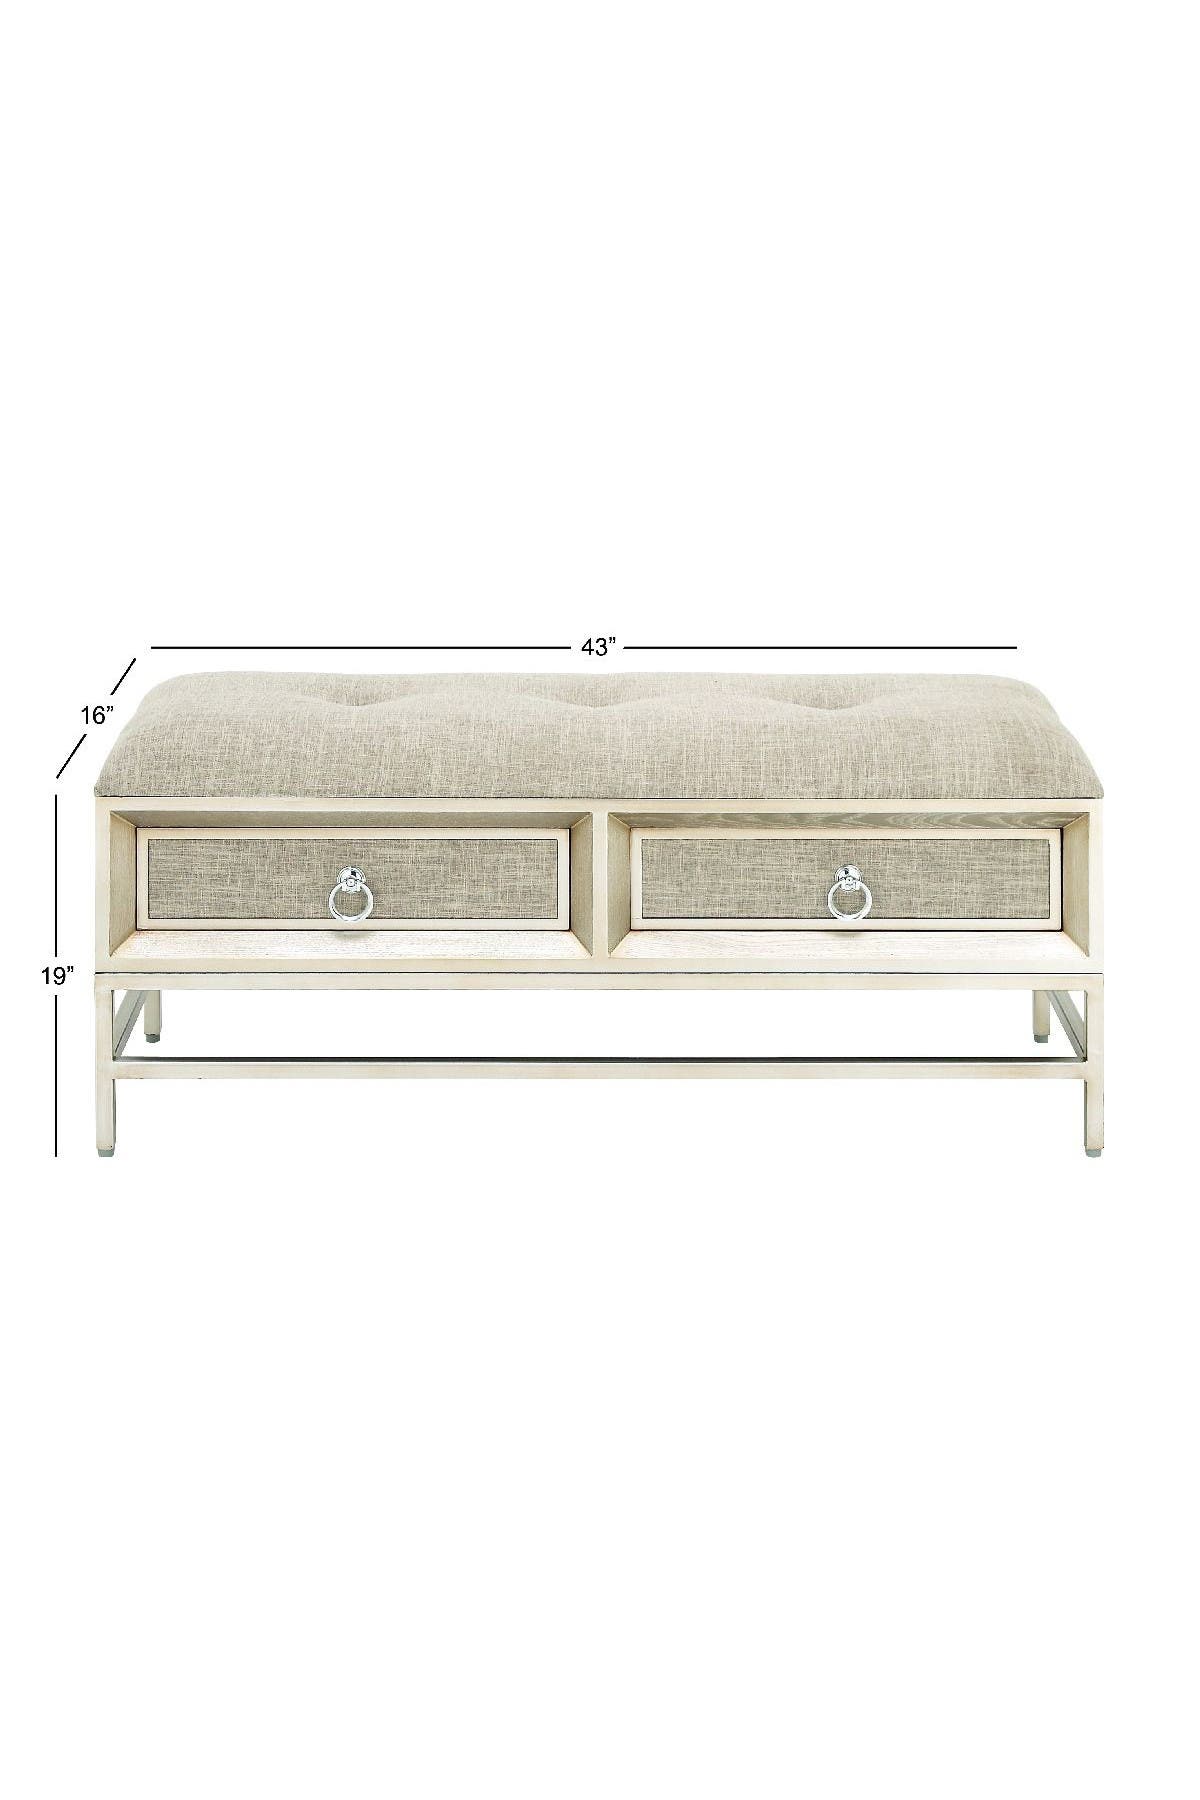 Willow Row Multi Contemporary Cushioned Storage Bench In Beige/khaki